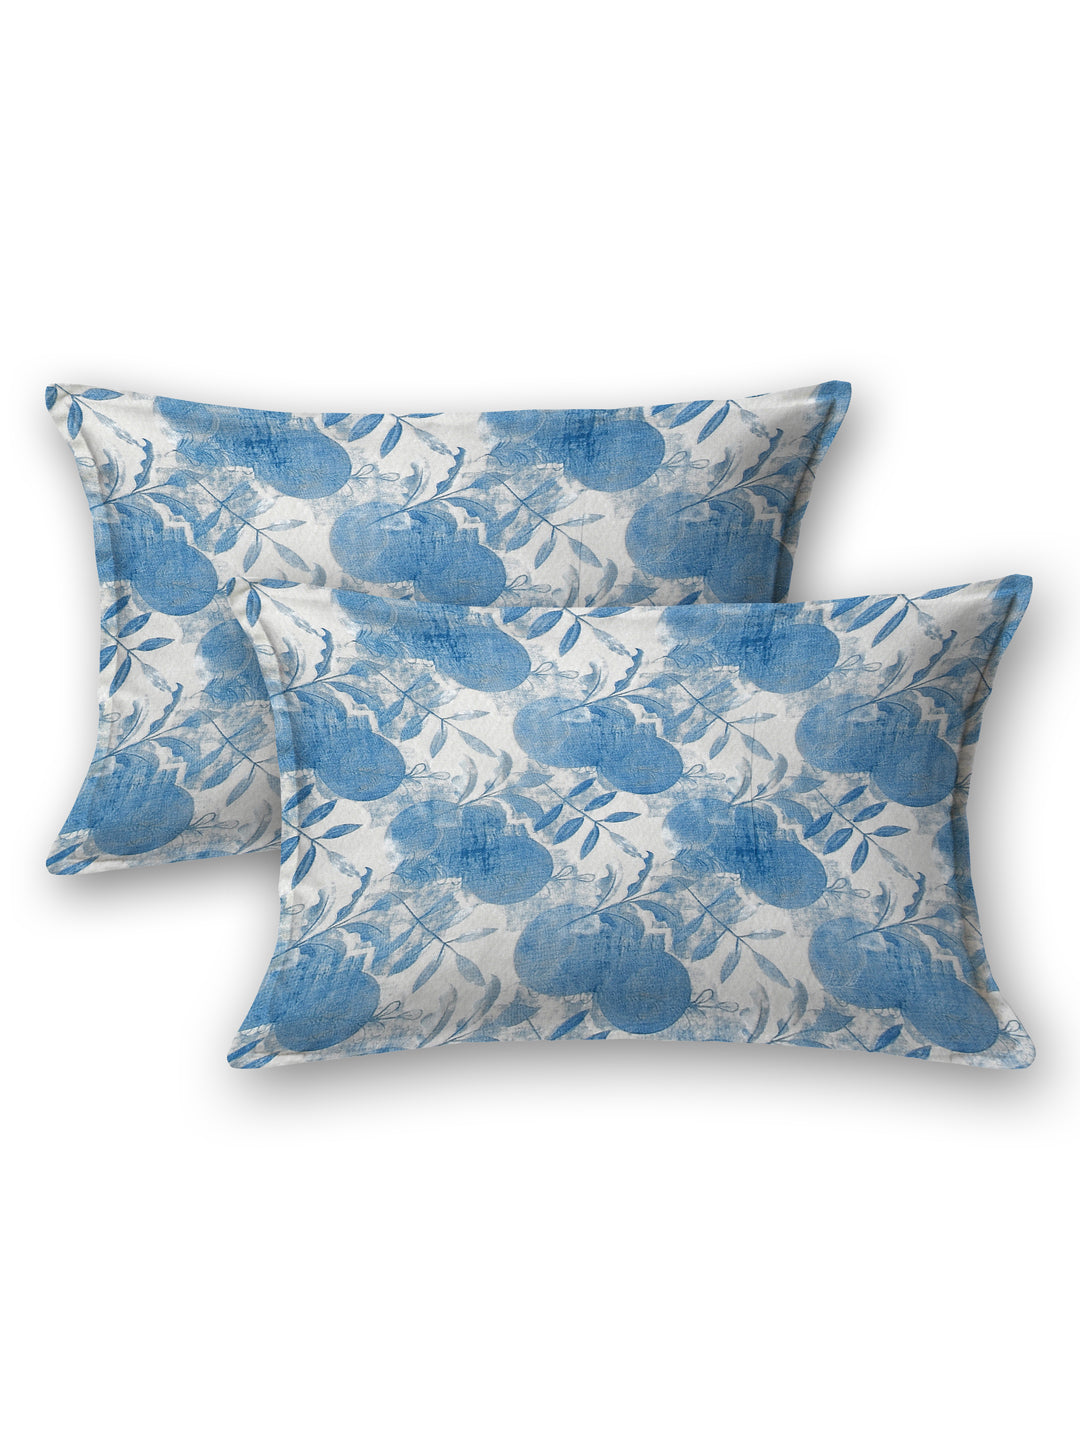 White & Blue Abstract Print King Size Bed Cotton Linen